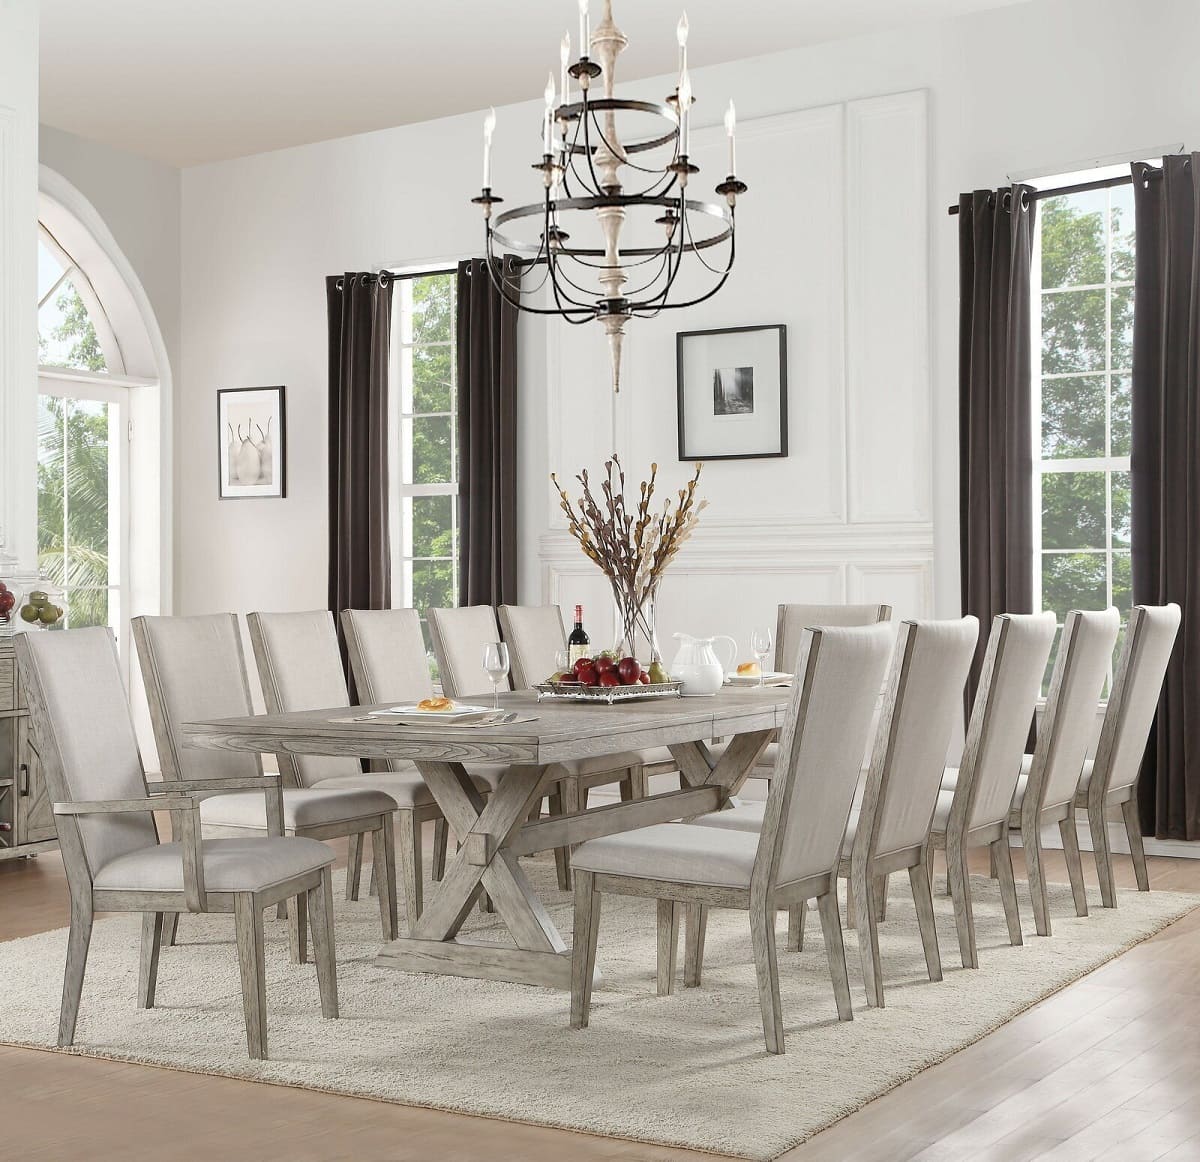 How Big Are Dining Room Tables?